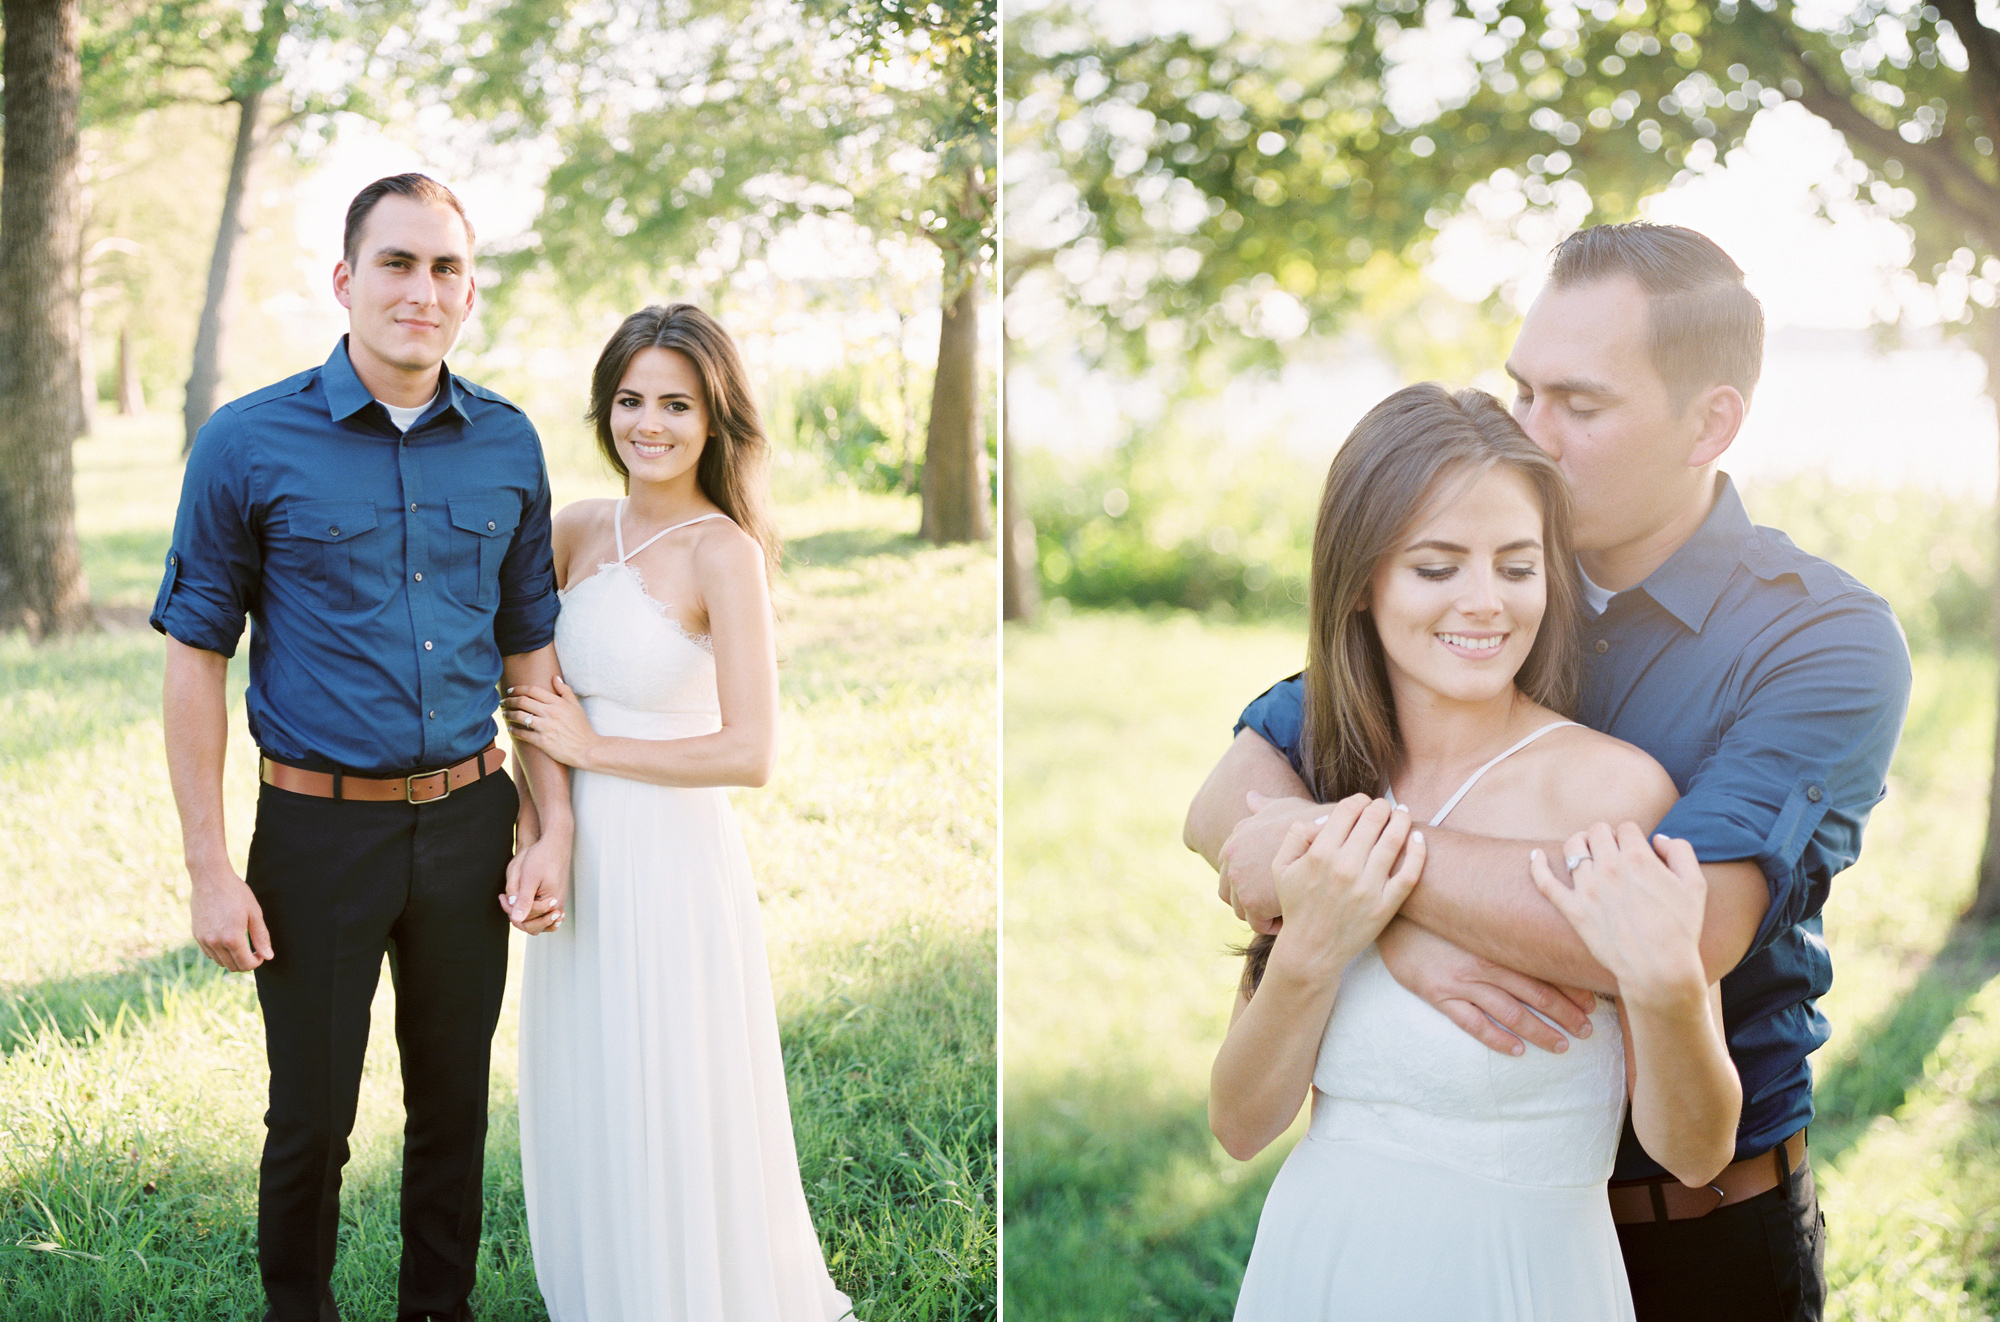 Dallas engagement session on film by DFW wedding photographer Tenth & Grace.